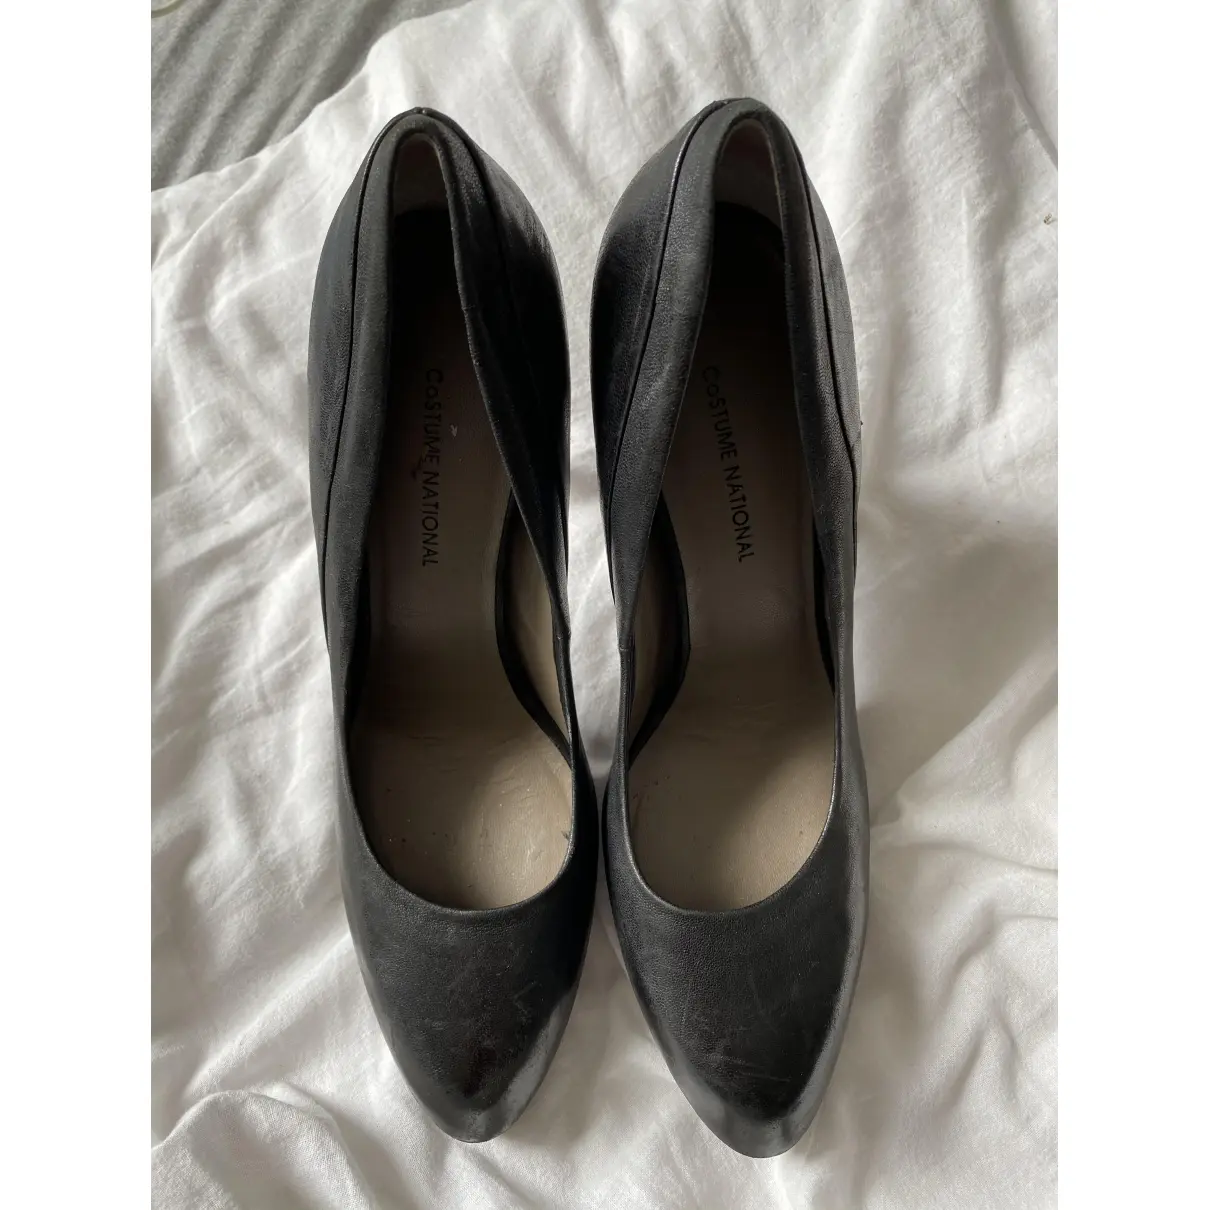 Costume National Leather heels for sale